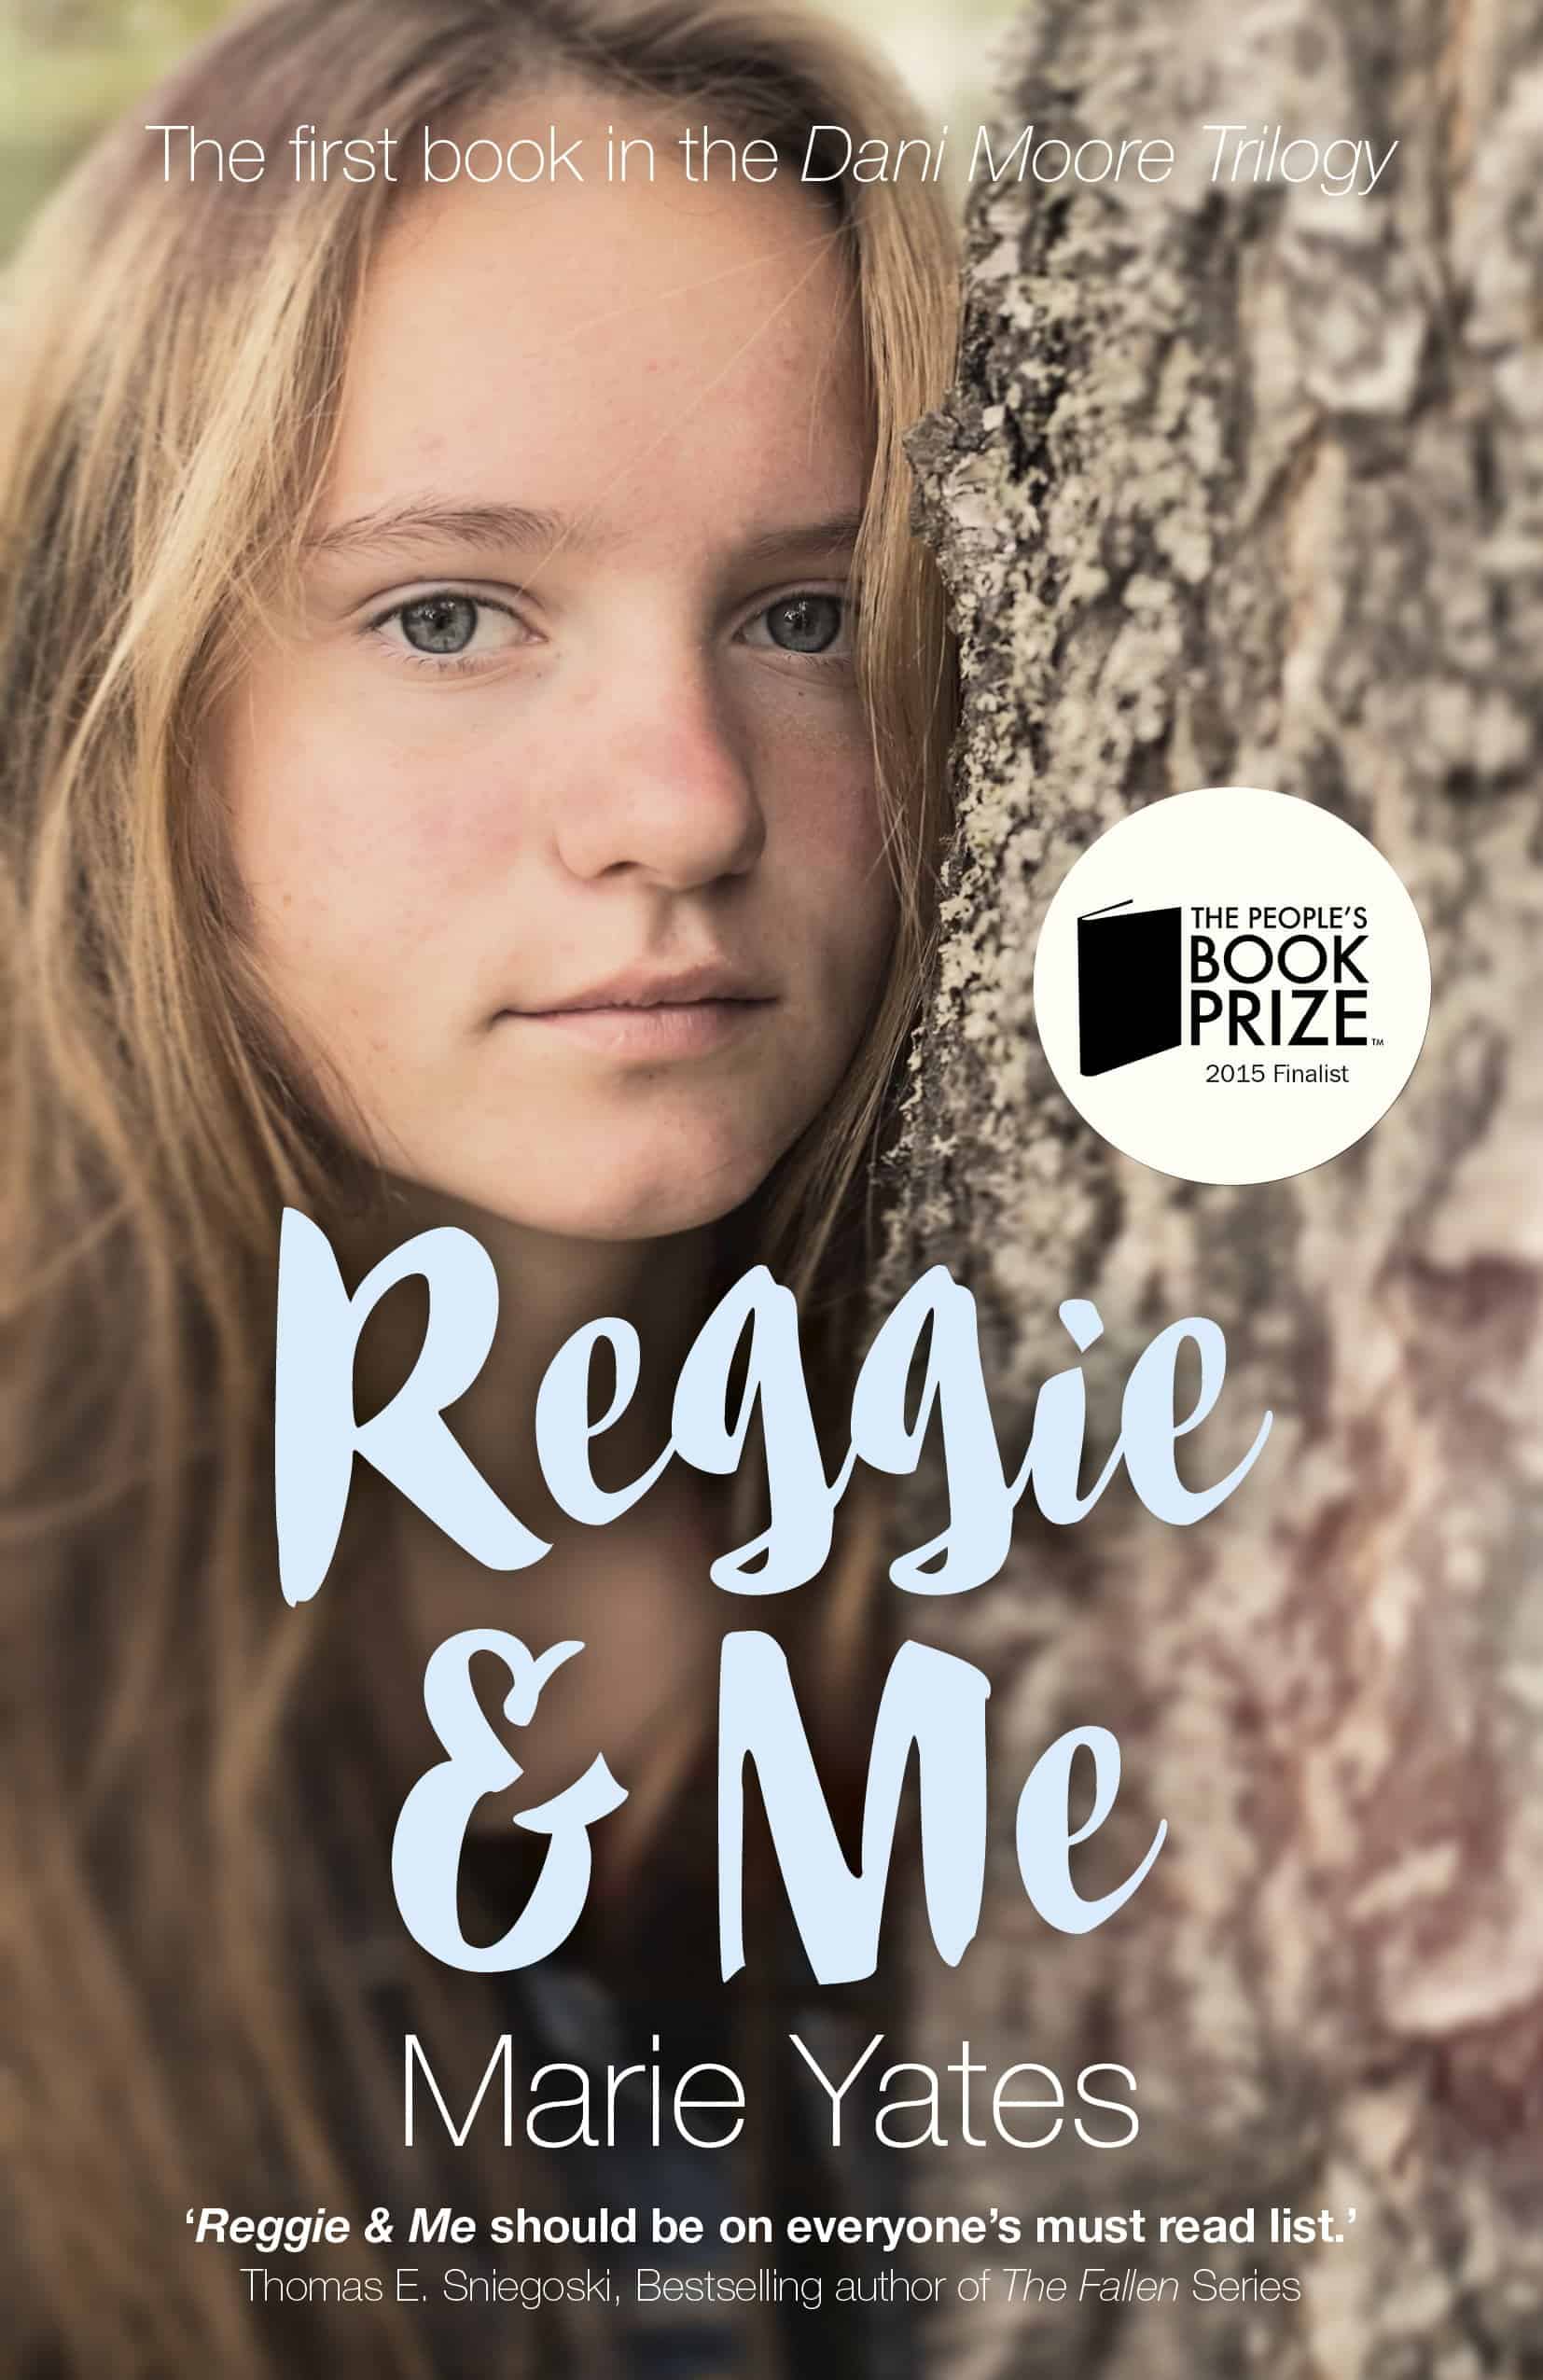 Reggie and Me by Marie Yates.